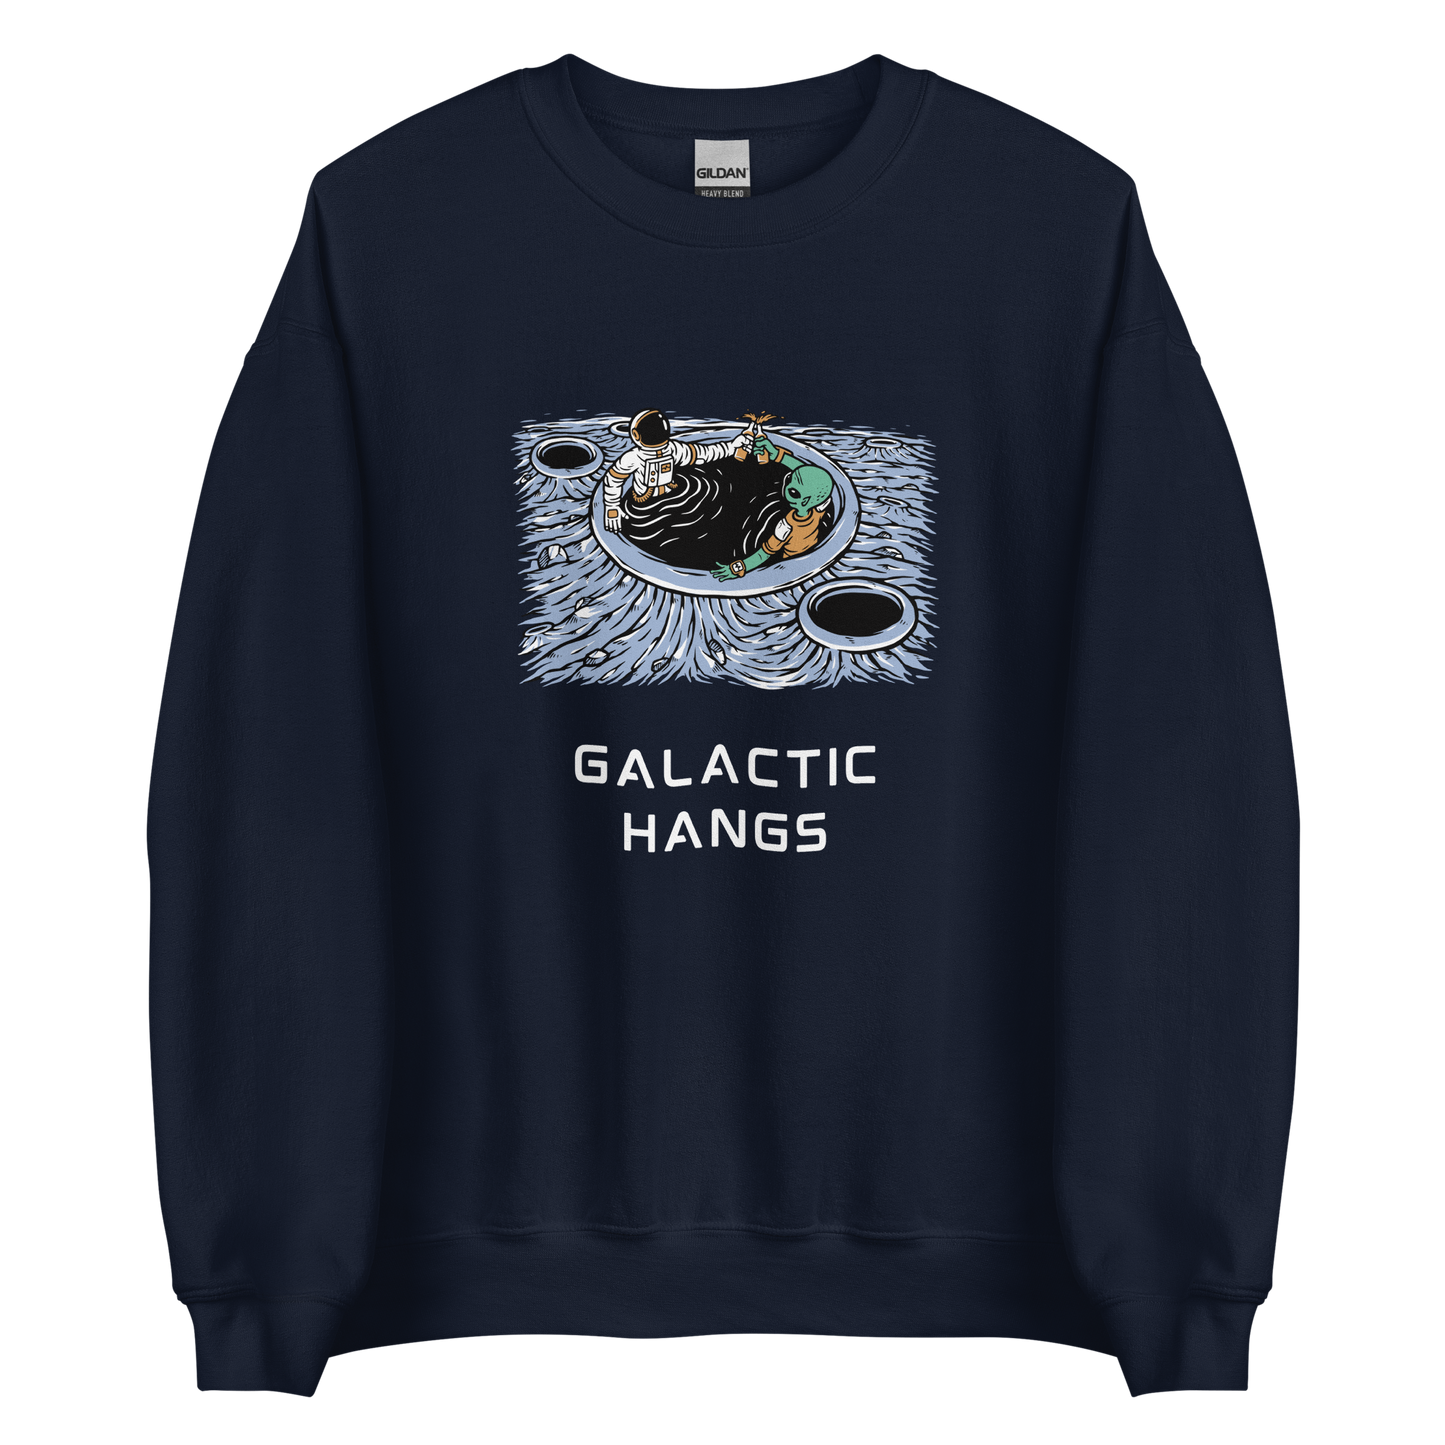 Navy Galactic Hangs Sweatshirt featuring an out-of-this-world graphic of an Astronaut and Alien Chilling Together - Funny Graphic Space Sweatshirts - Boozy Fox